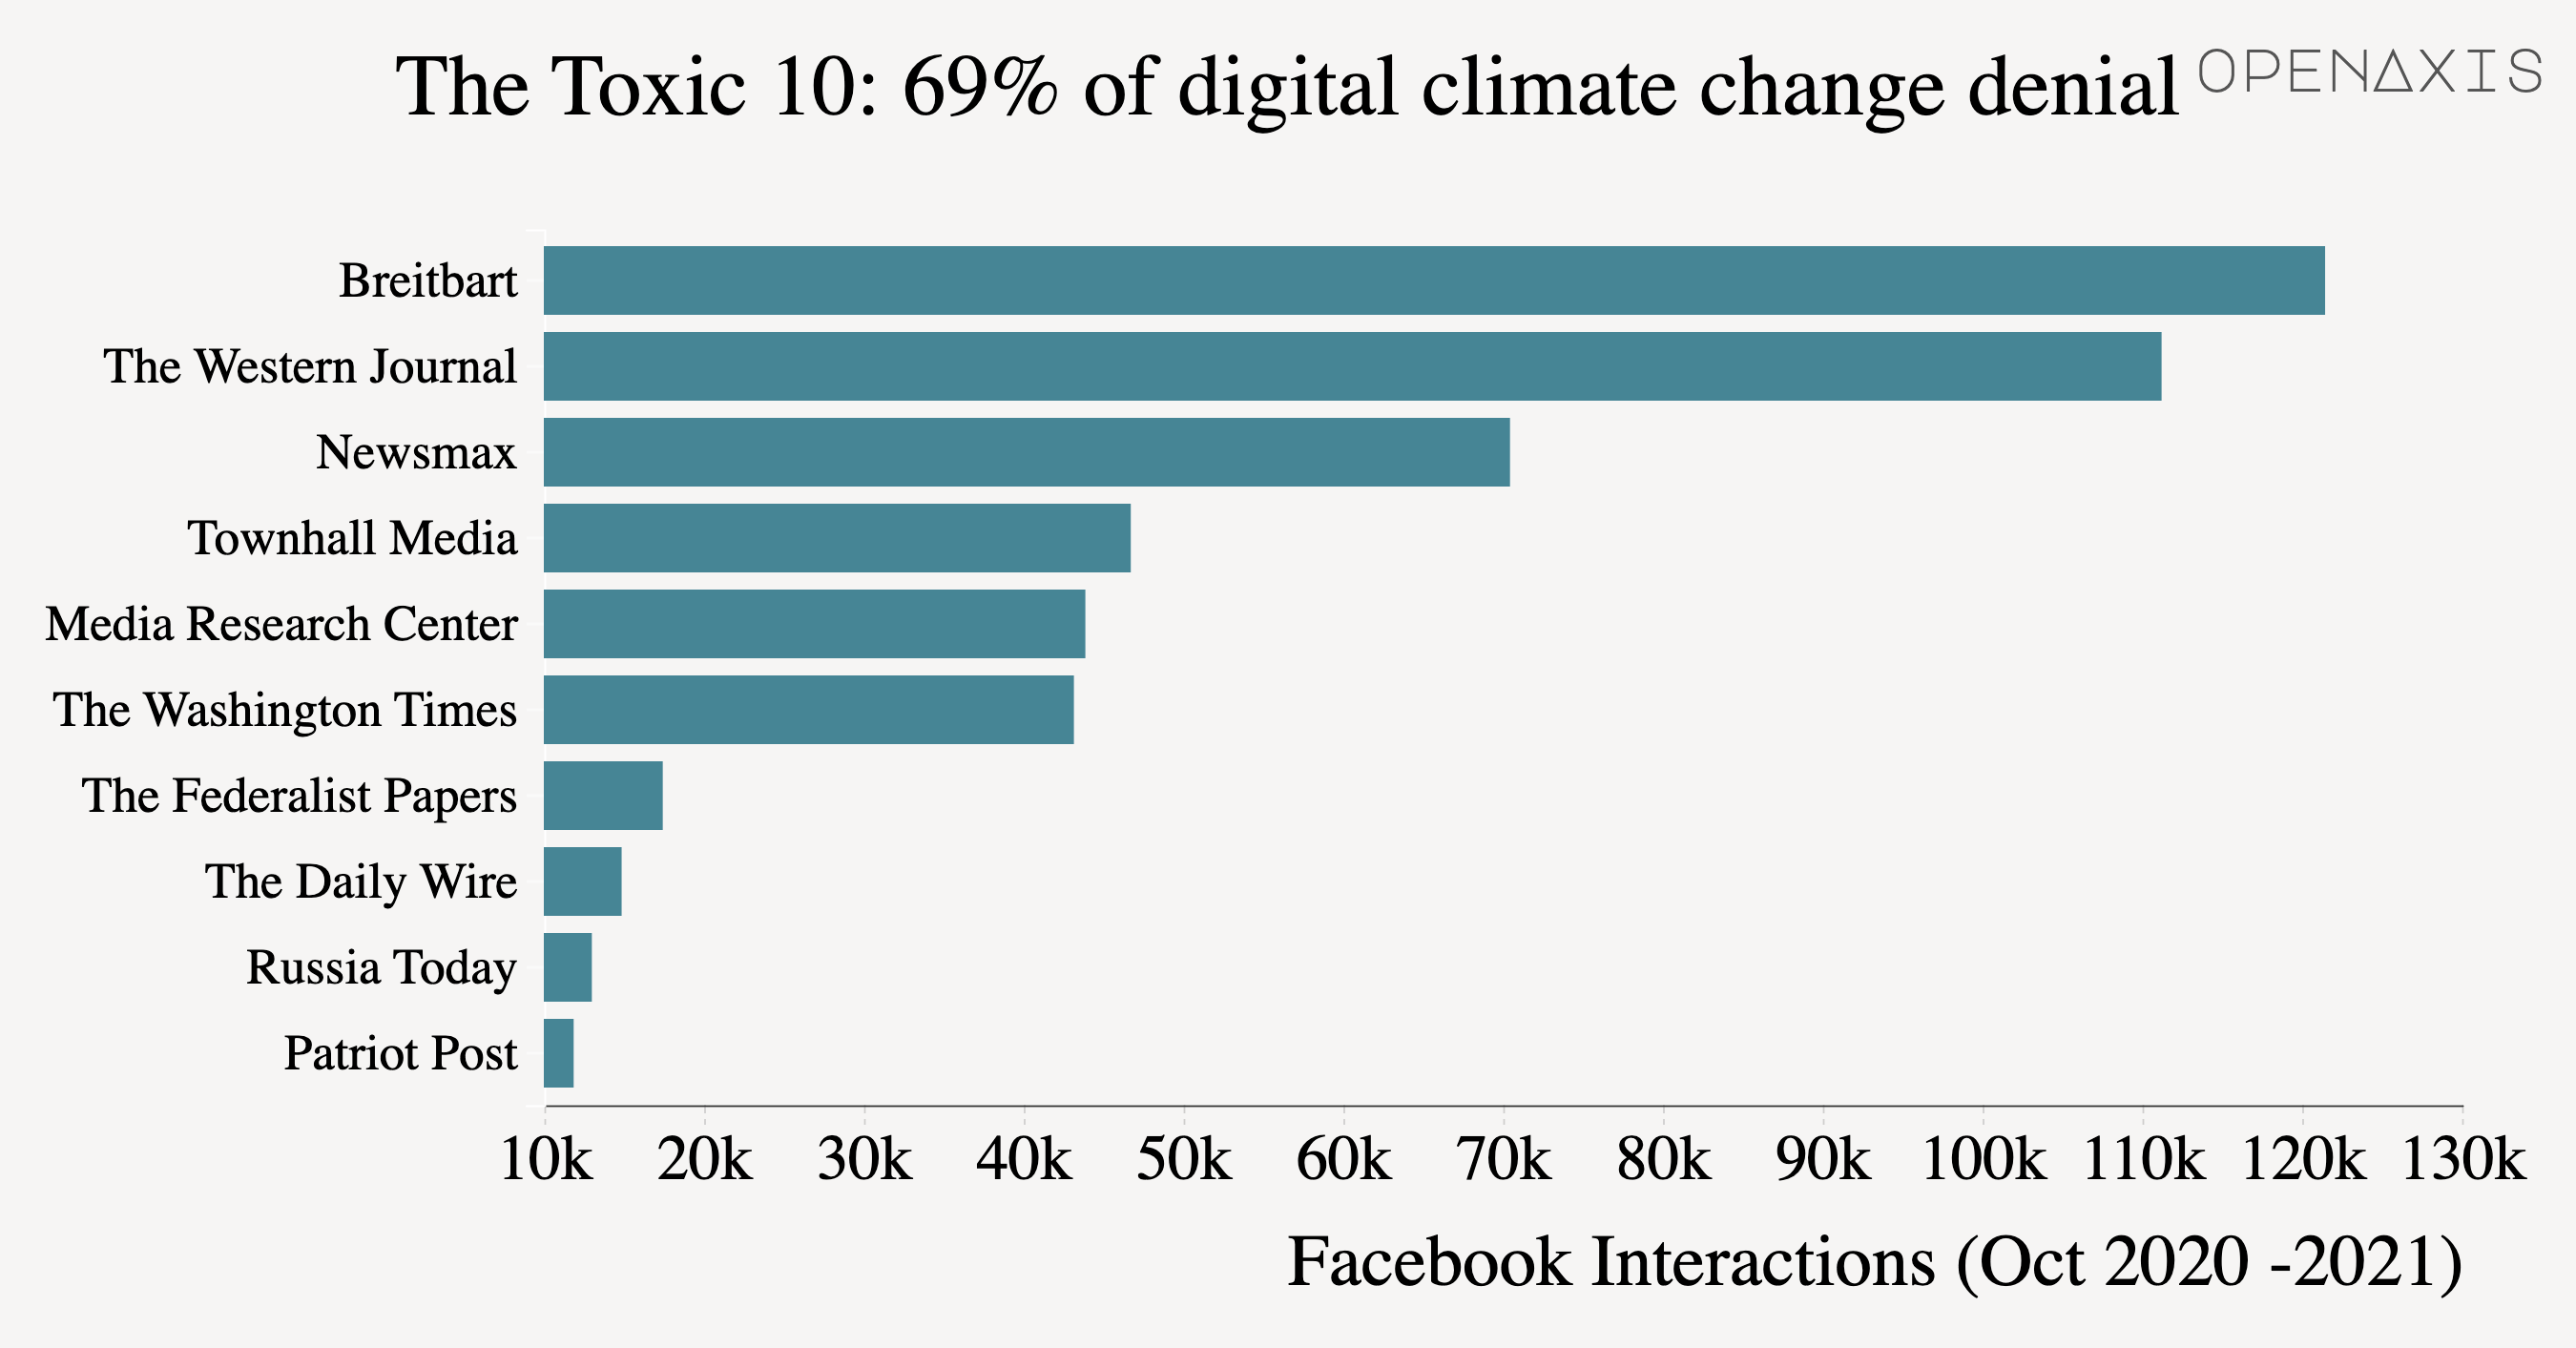 "The Toxic 10: 69% of digital climate change denial"